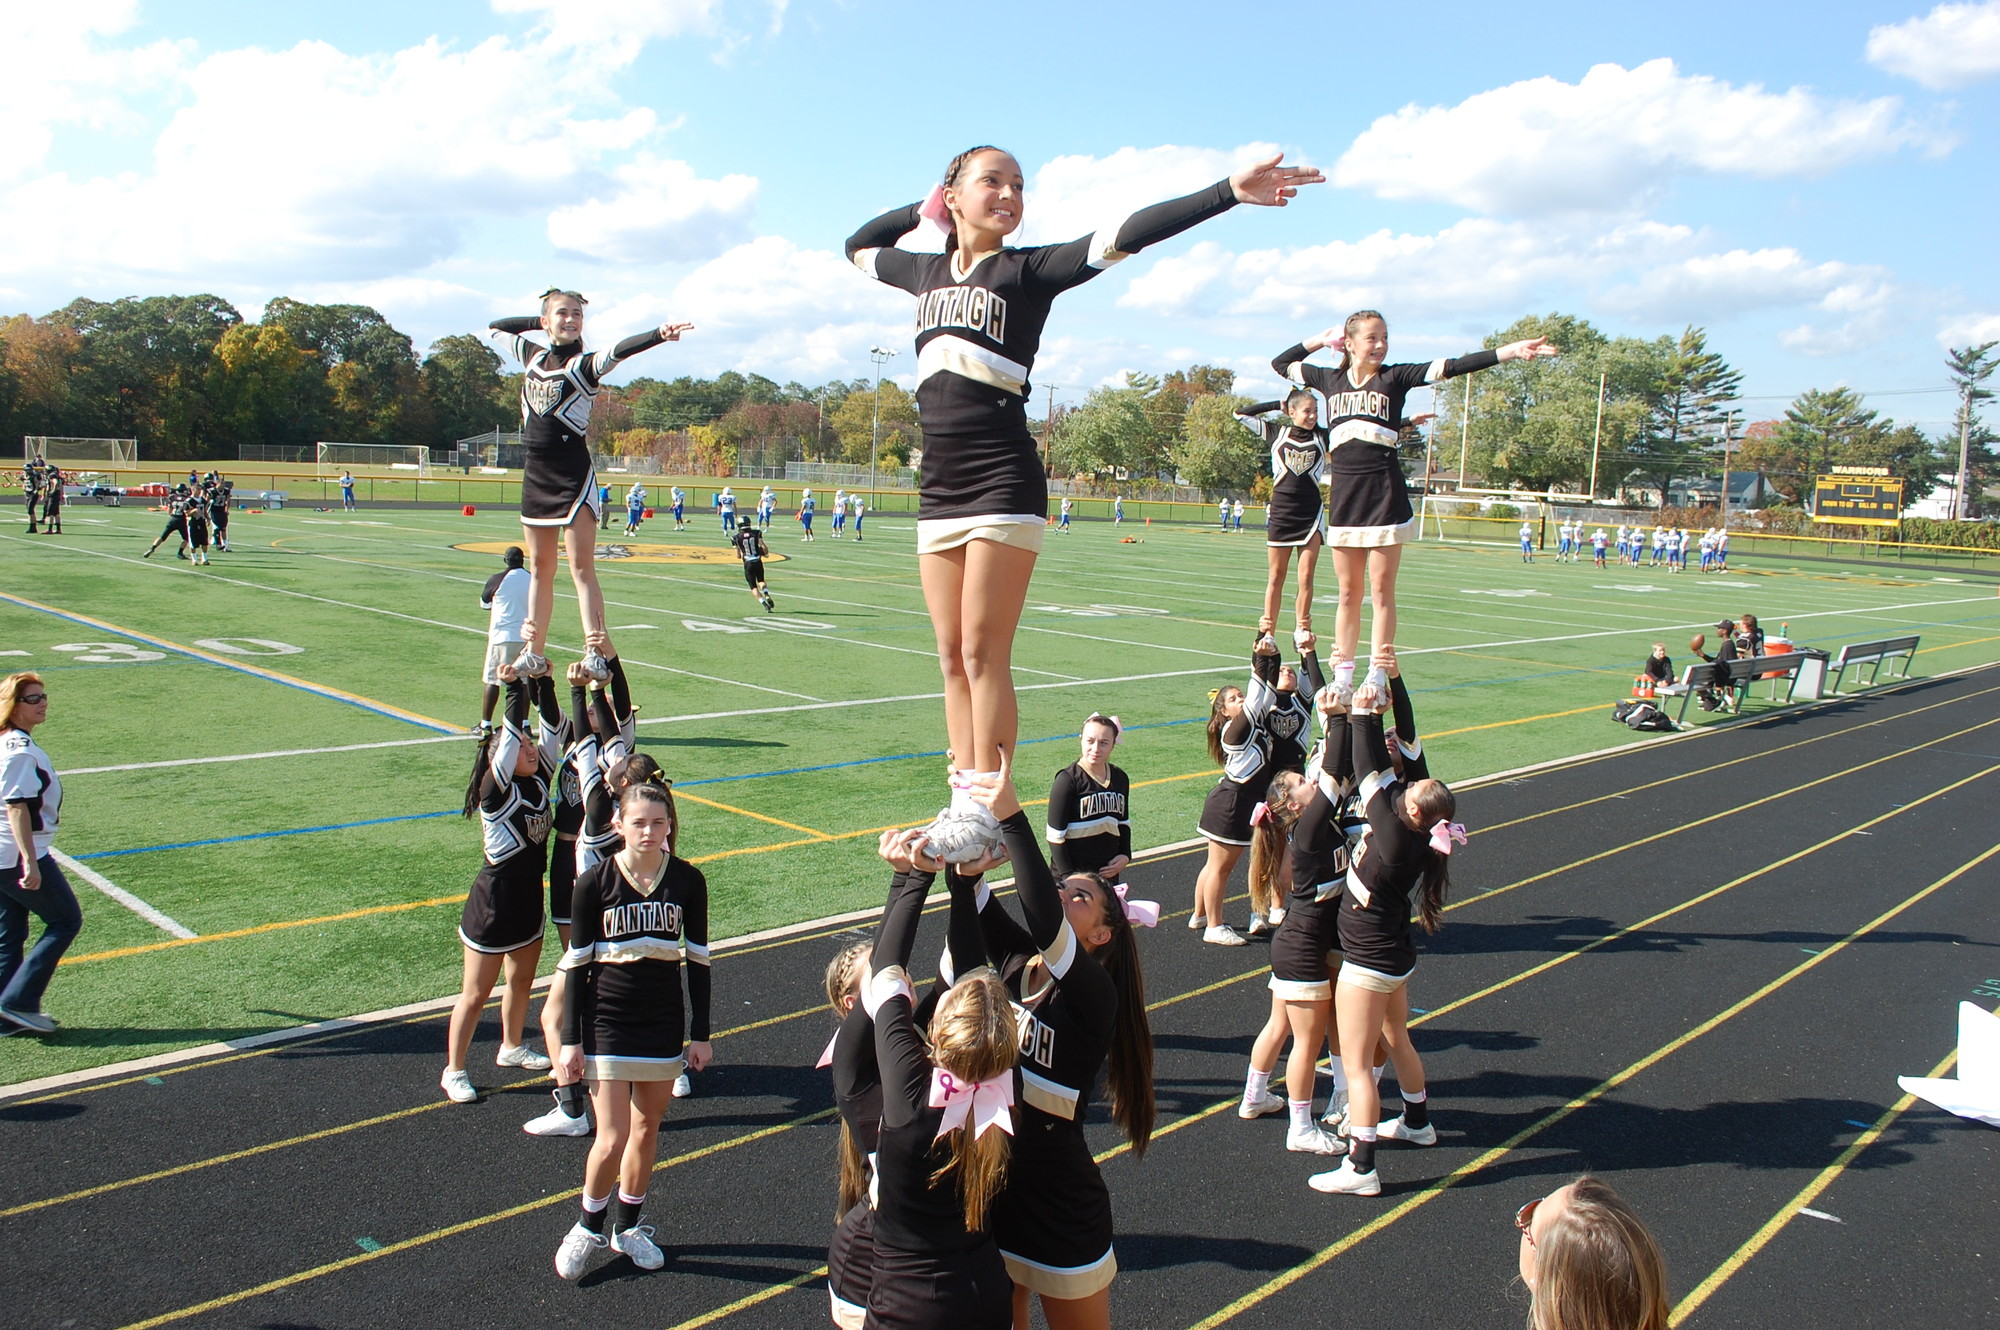 Wantagh High School’s cheerleaders gave a rousing pre-game performance at the Homecoming celebration.